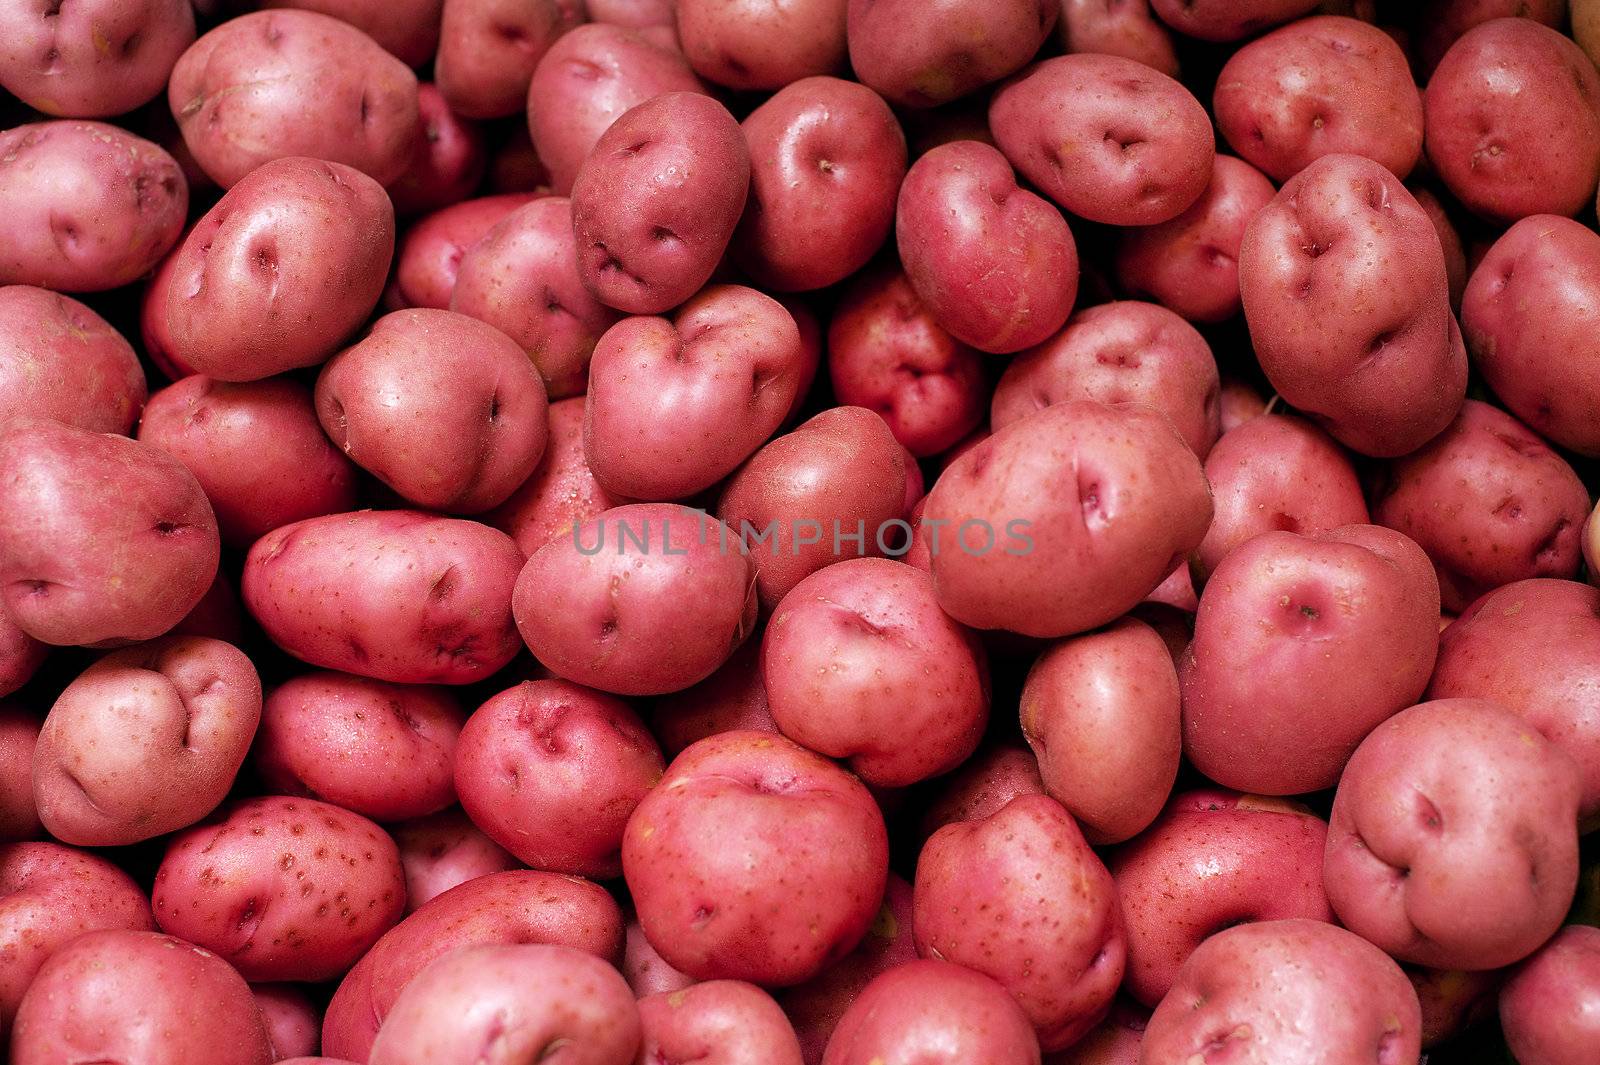 red potatoes in a pile on a farm stand